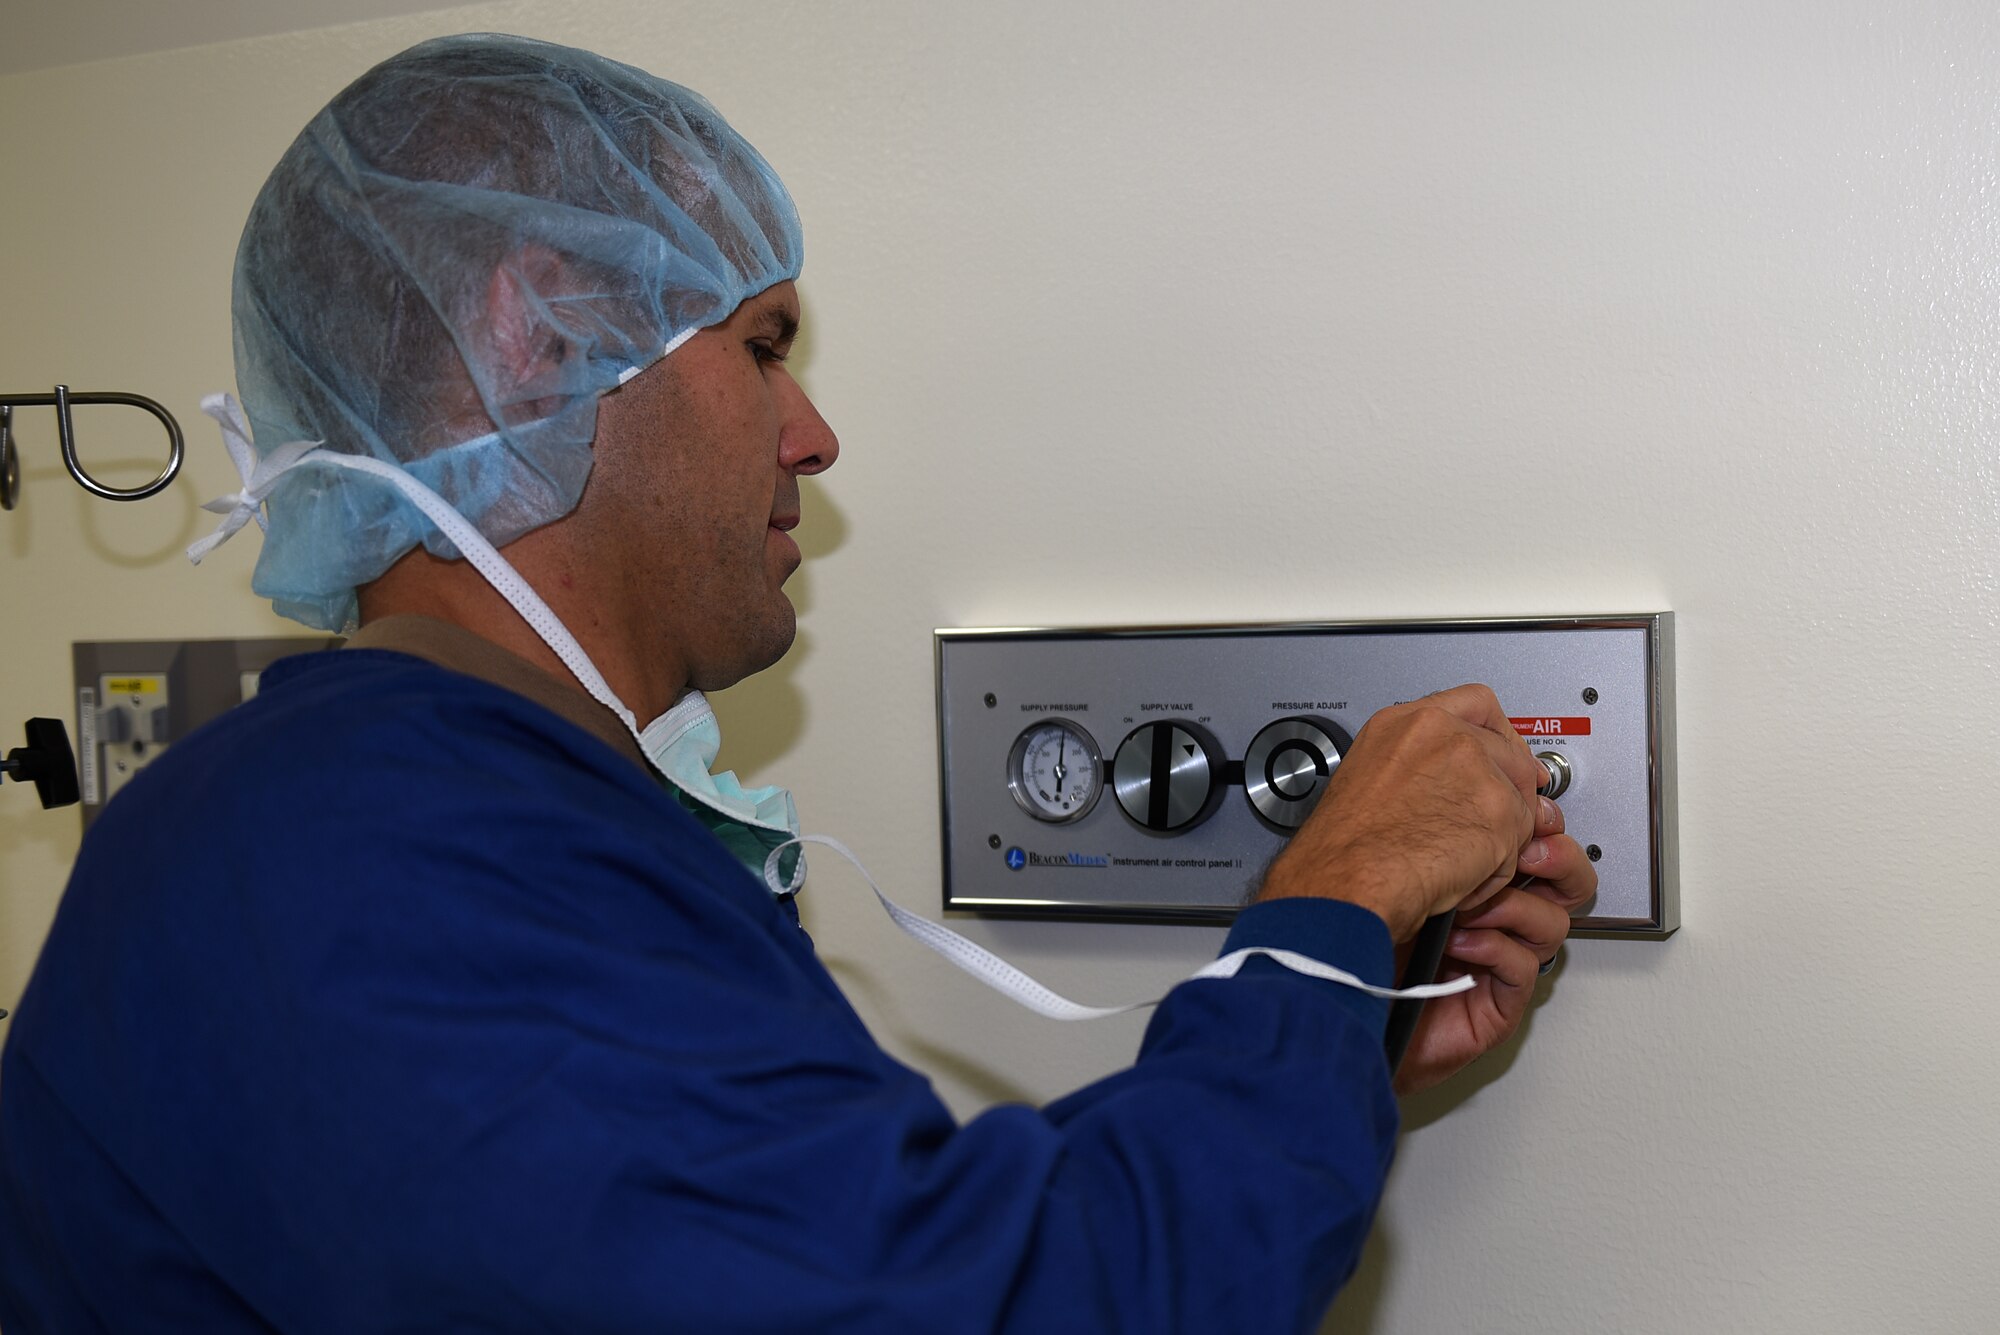 U.S. Air Force Col. Zachery Jiron, 60th Air Mobility Wing vice commander, plugs in the Spider into the pneumatic system to power the Spider’s shoulder positioner Aug. 8, 2019, at David Grant USAF Medical Center Travis Air Force Base, California. The Spider is an operating room piece of equipment that is ideal for the traction of ankle, wrist and elbow procedures. As part of the Leadership Rounds program, Jiron participated in a simulated surgery to get a firsthand experience of all the precautions medical staff take before every surgery. (U.S. Air Force photo by Airman 1st Class Cameron Otte)